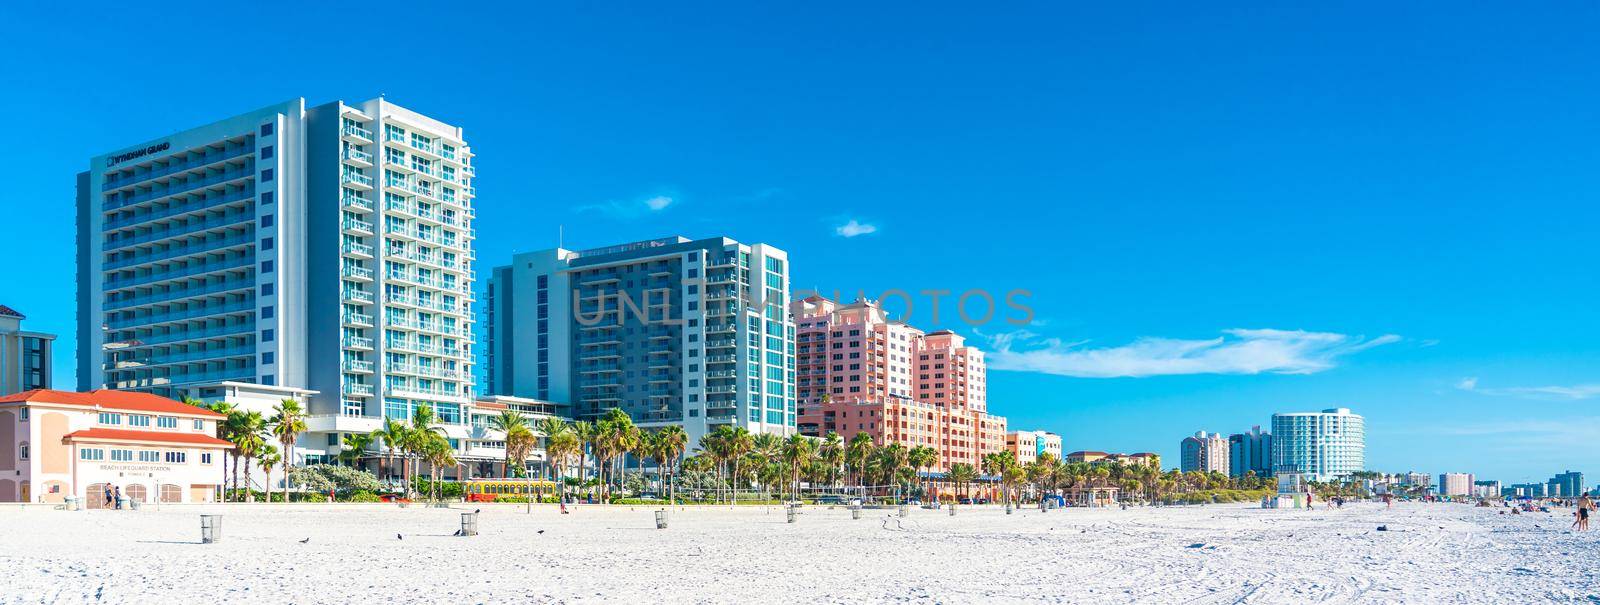 Clearwater beach, Florida, USA - September 17, 2019: Beautiful Clearwater beach with white sand in Florida USA by Mariakray